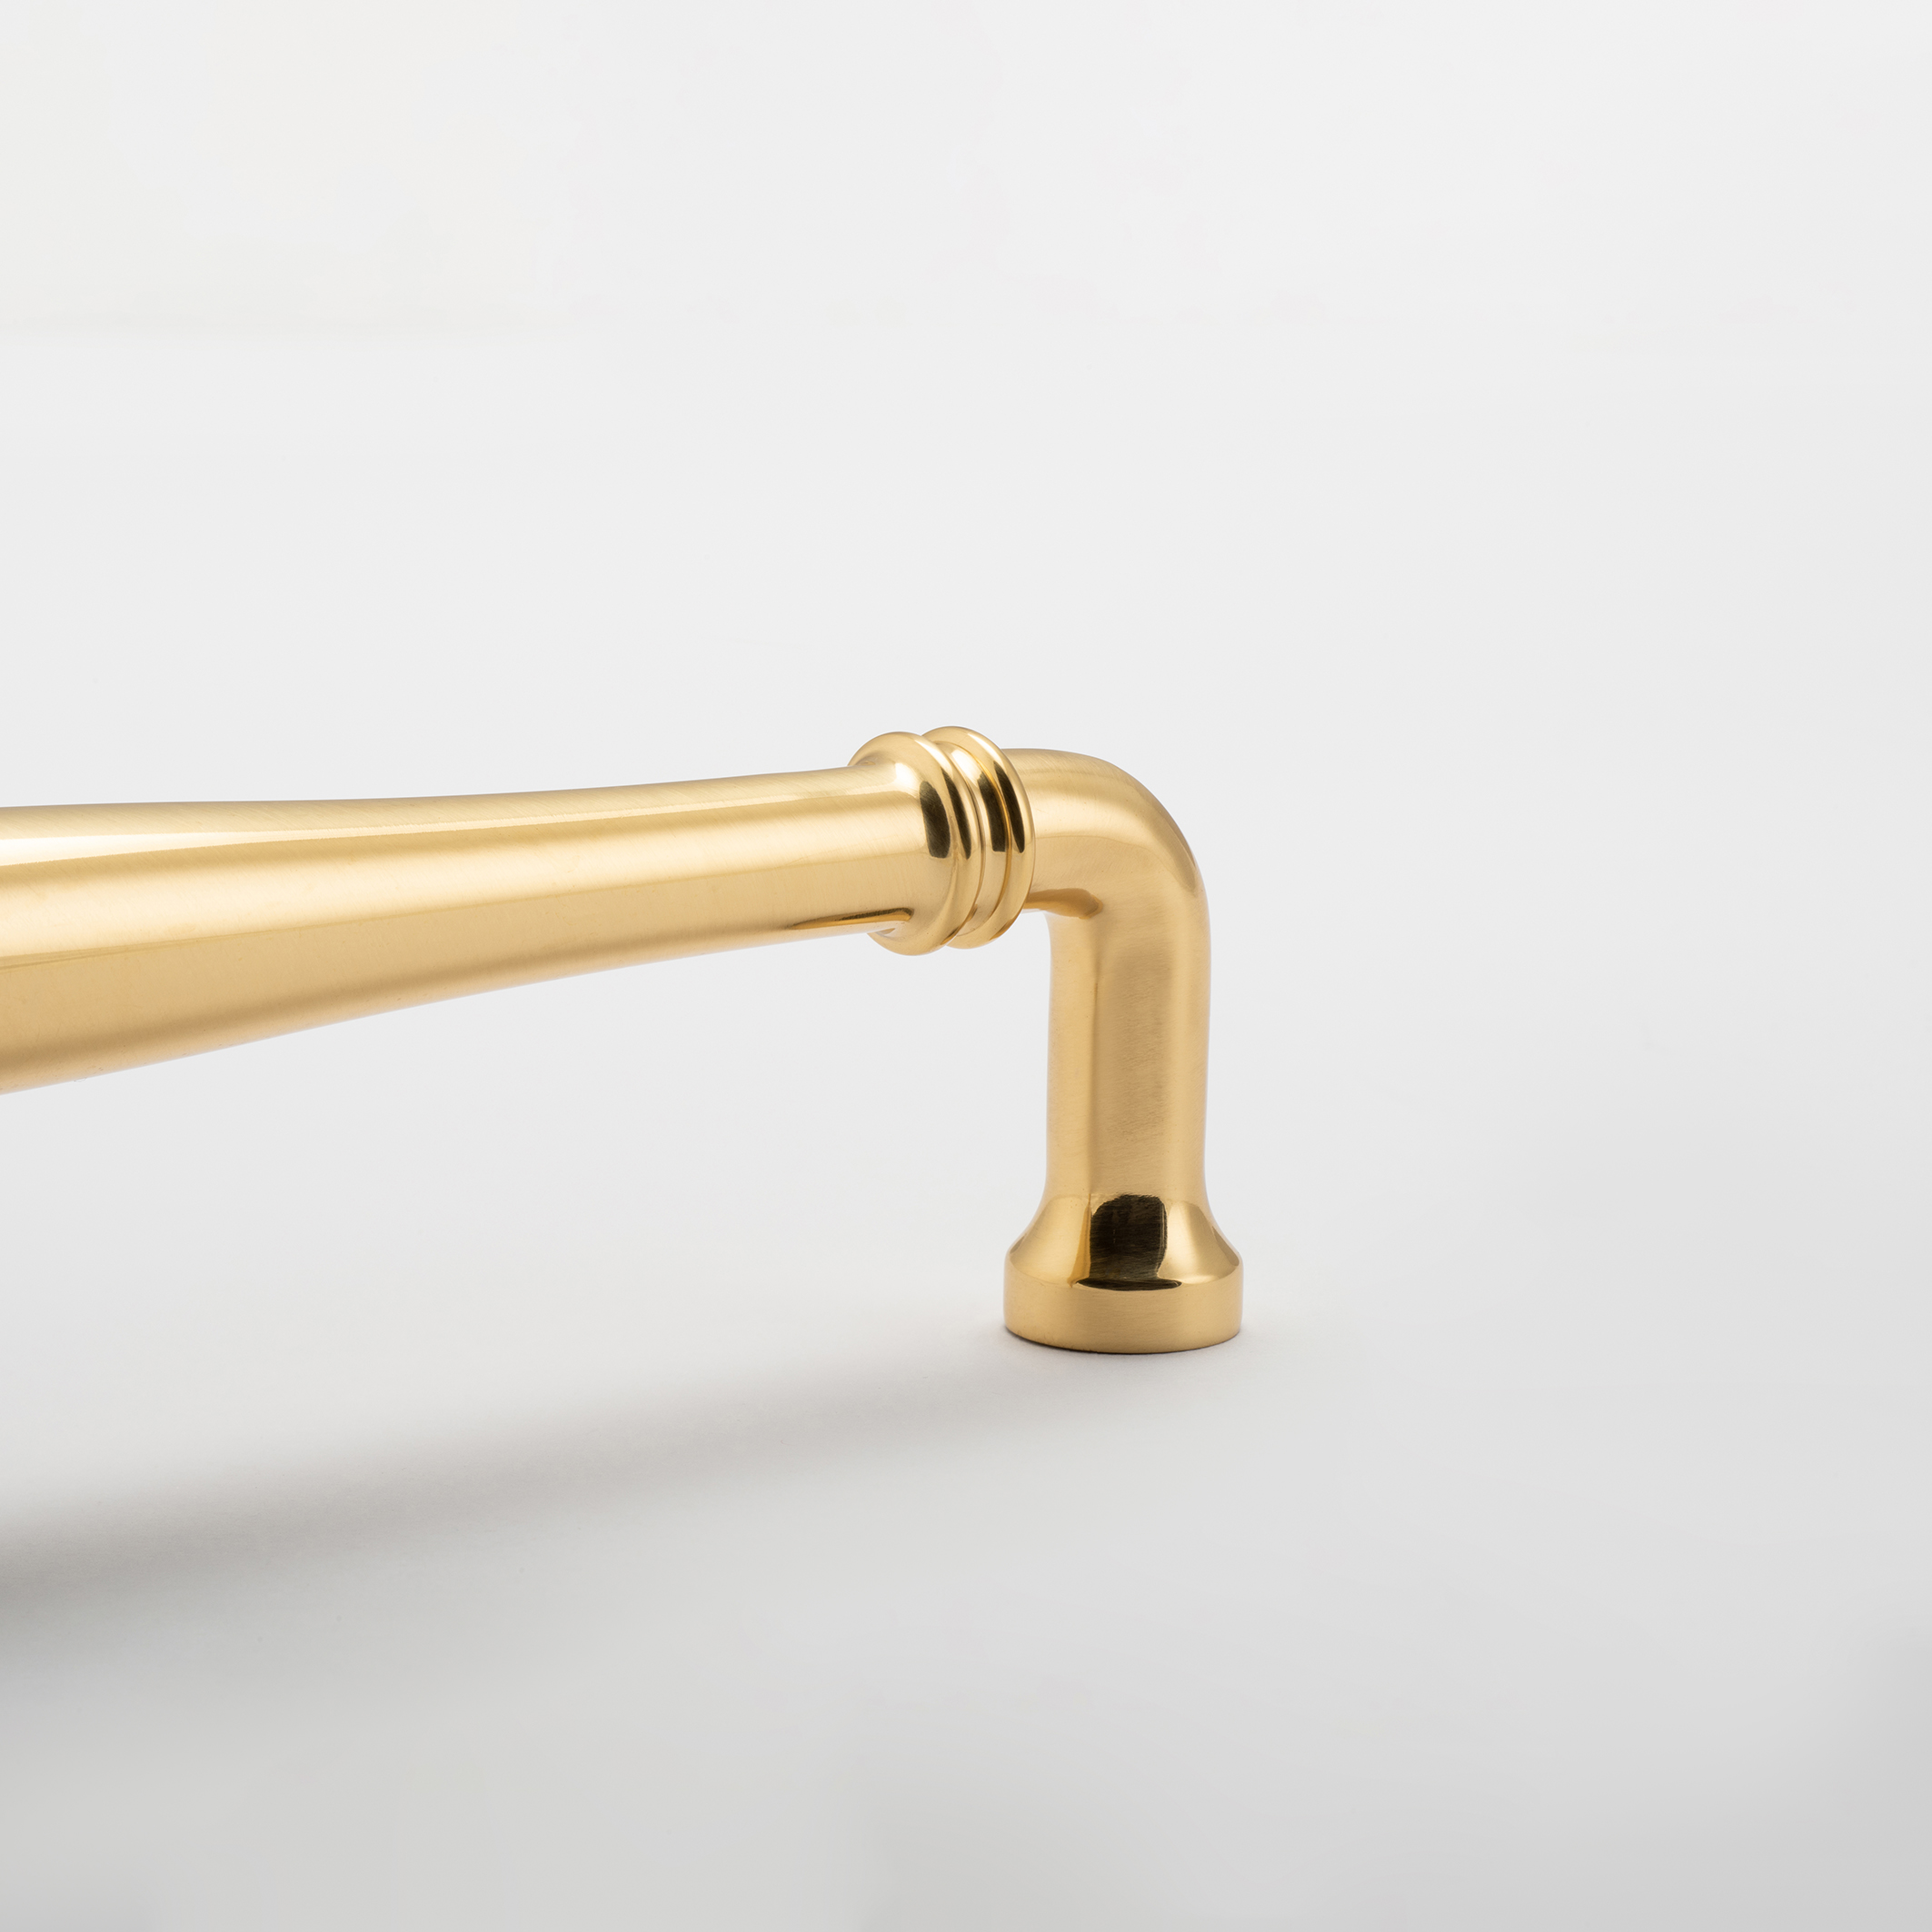 21060B - Sarlat Cabinet Pull with Backplate - CTC128mm - Polished Brass